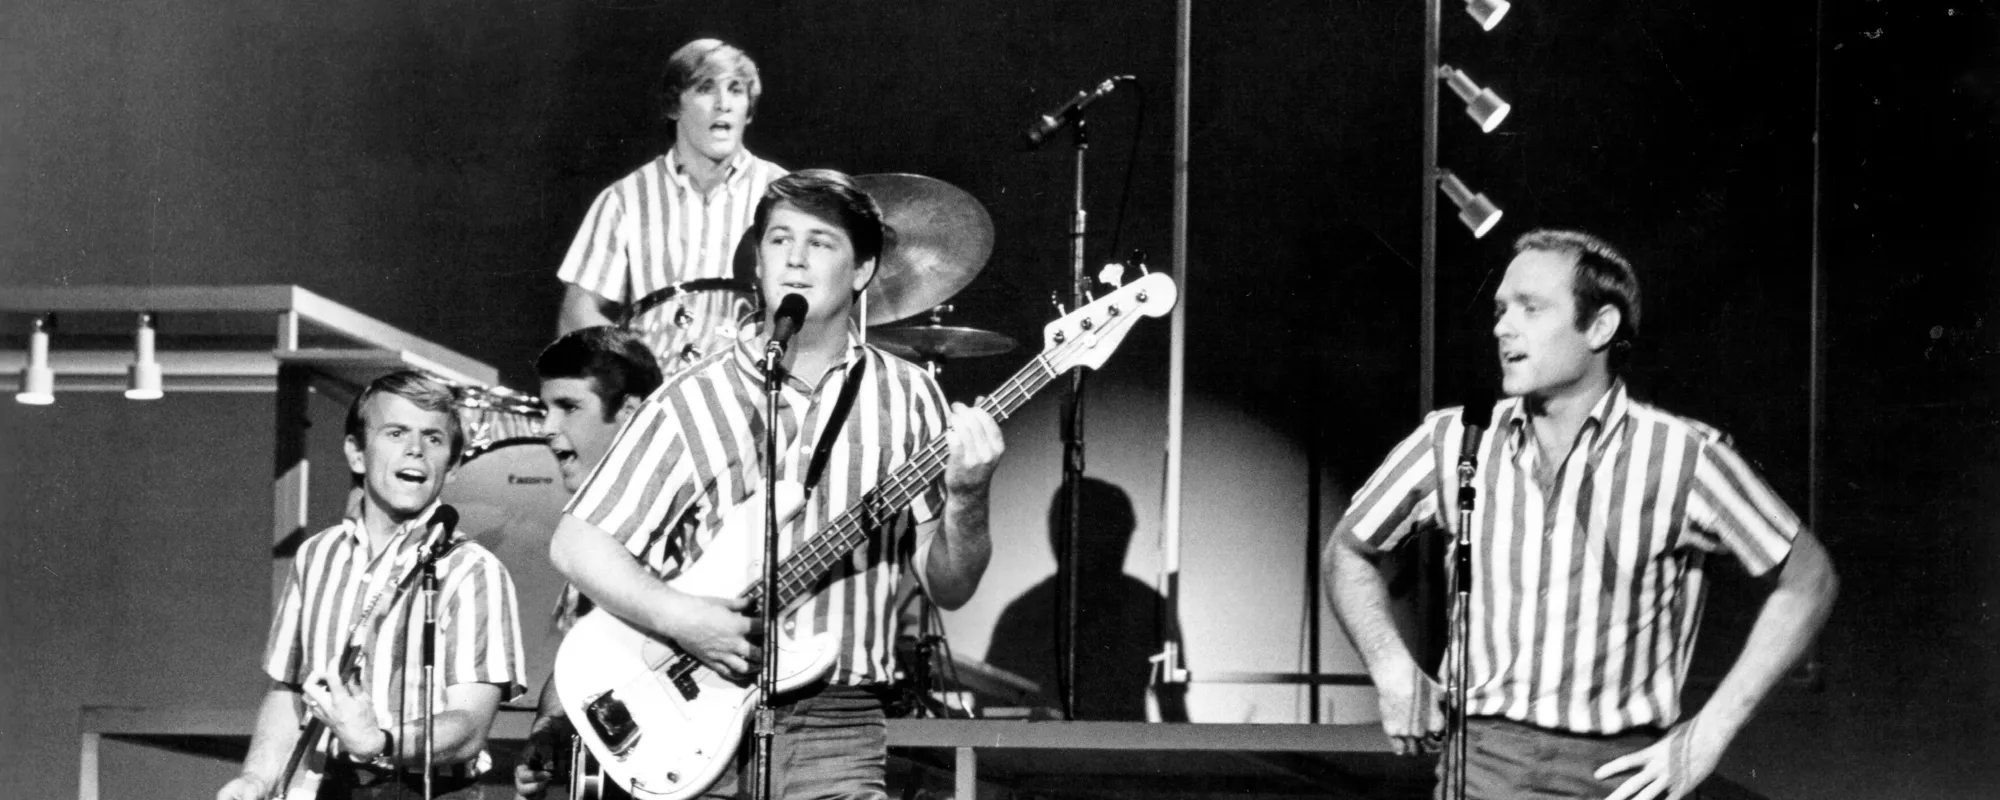 A Nation In Mourning: The Story Behind “The Warmth of the Sun” by The Beach Boys